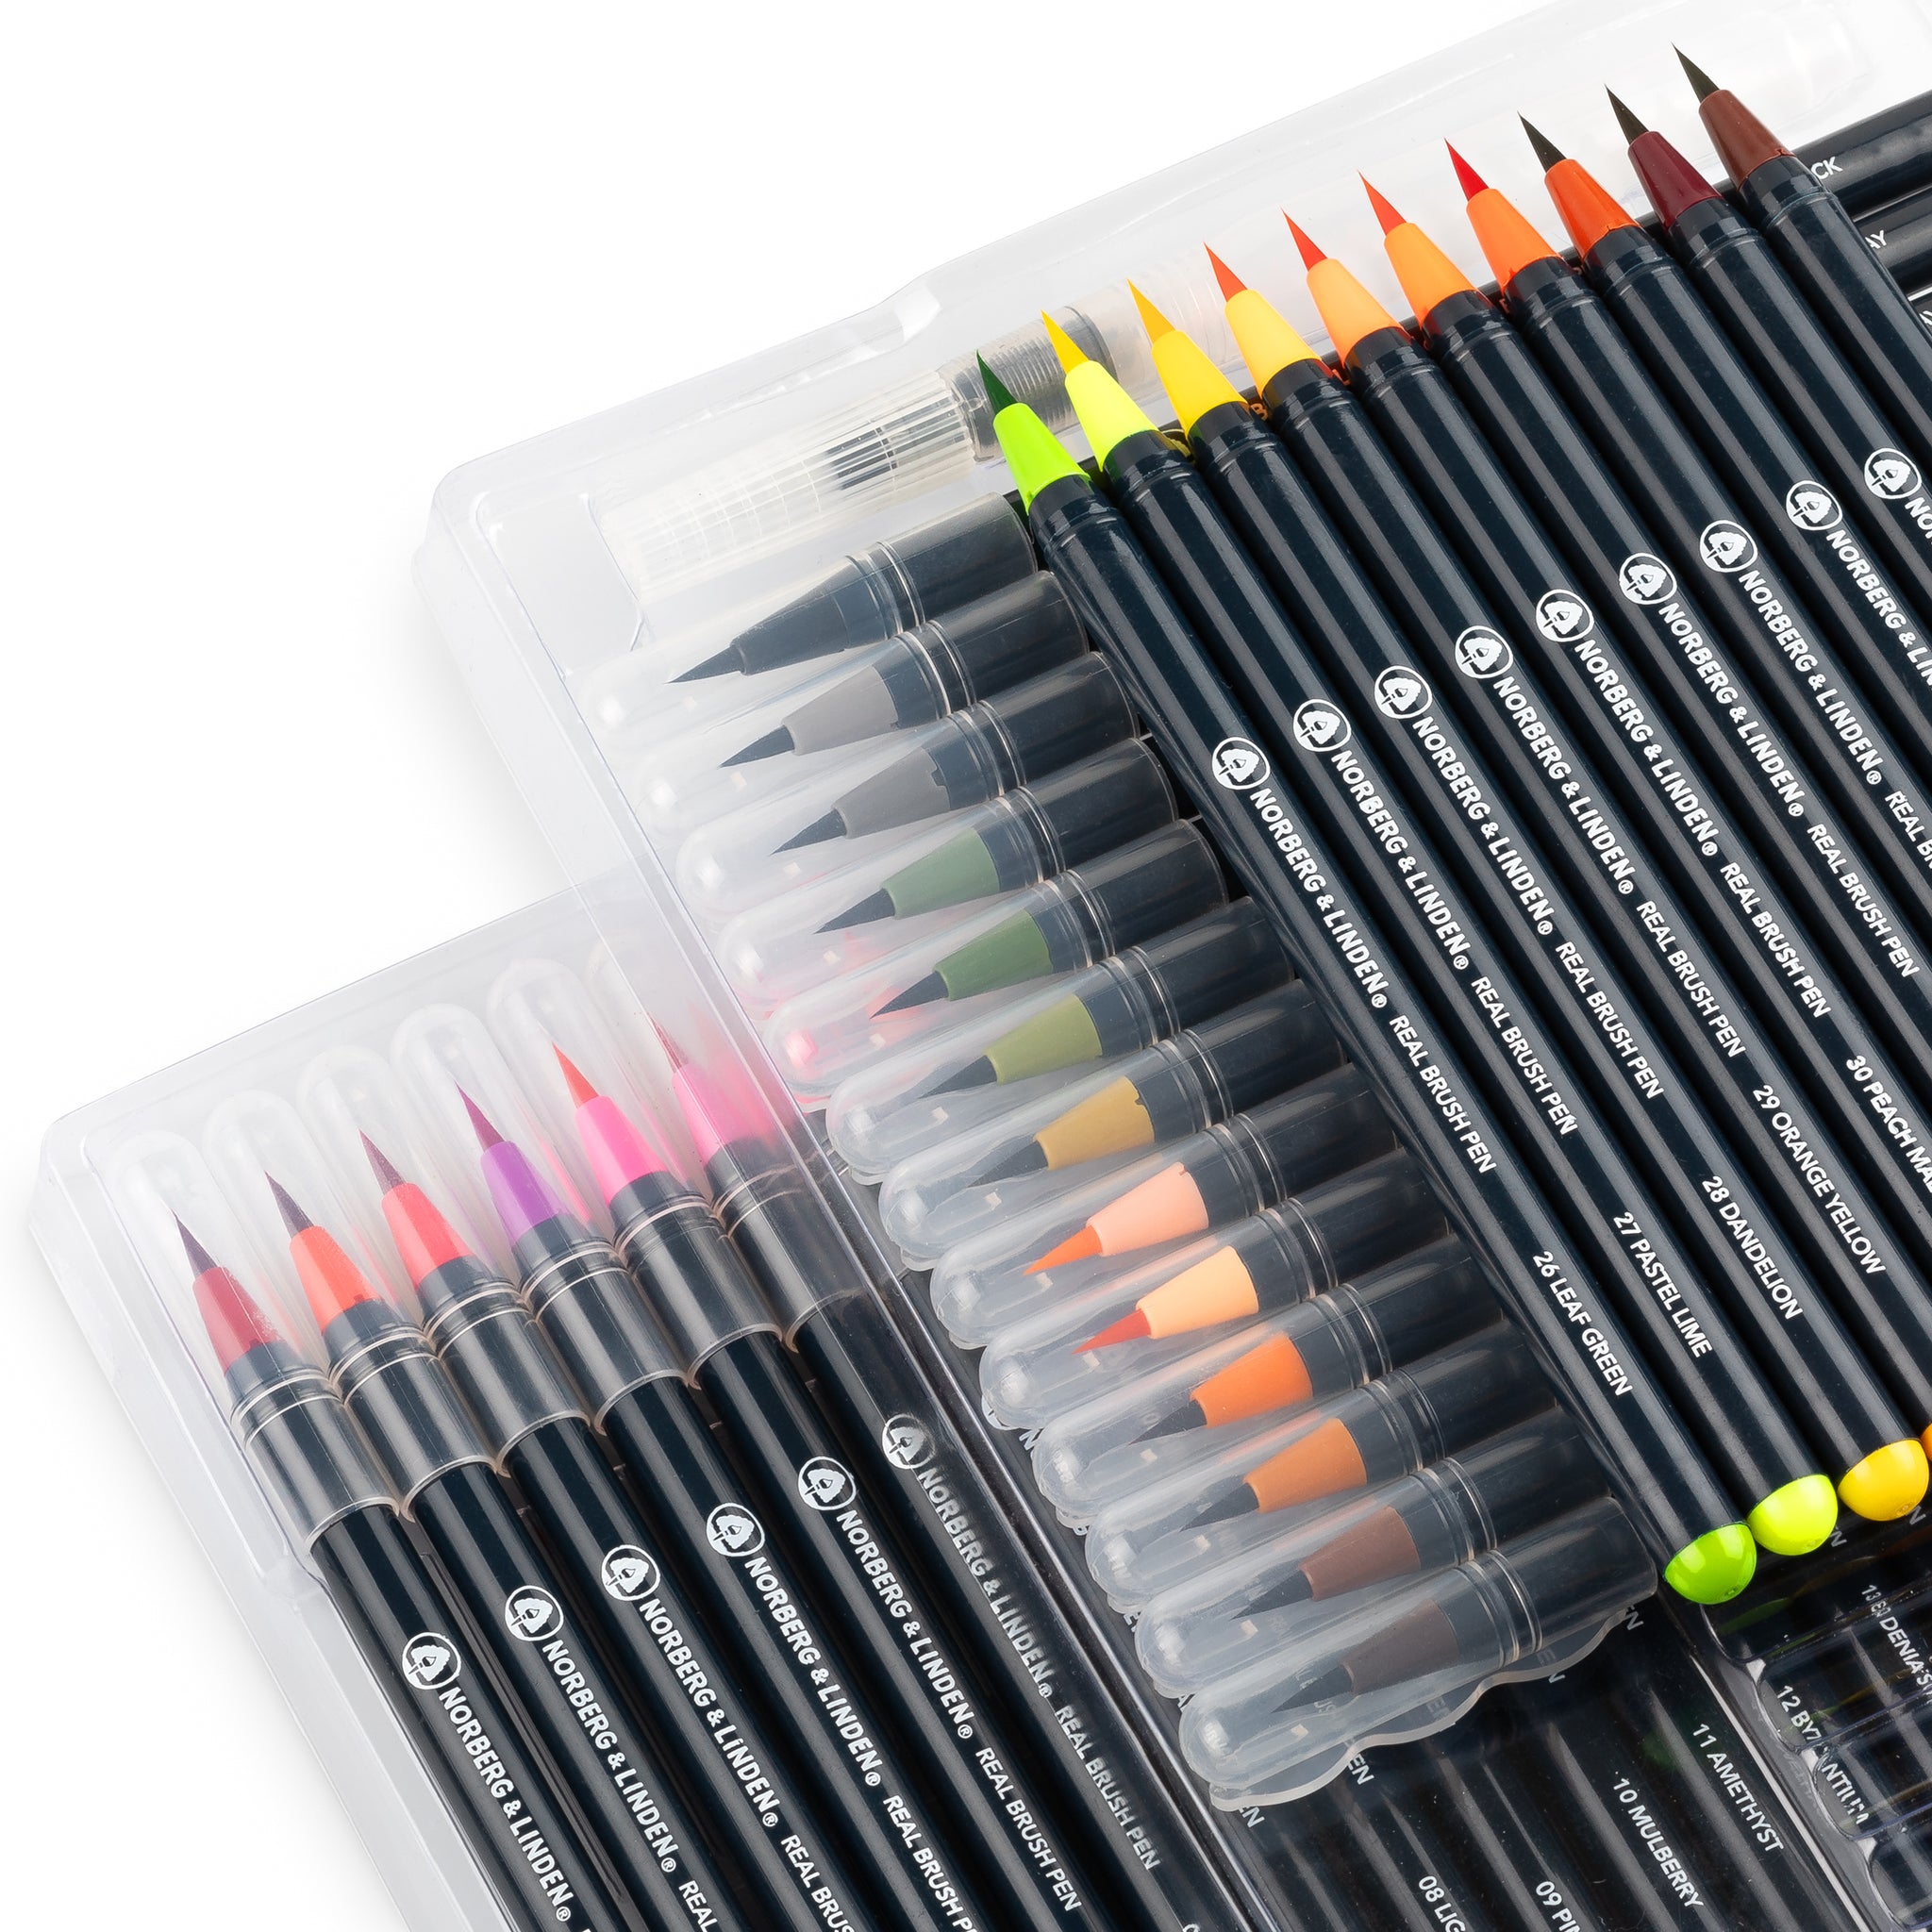 6-Piece Water Coloring Brush Pen Set of 6 (2 of Each Sizes - 01, 02, 03) -  Refillable, 6-Piece Brushes - Kroger